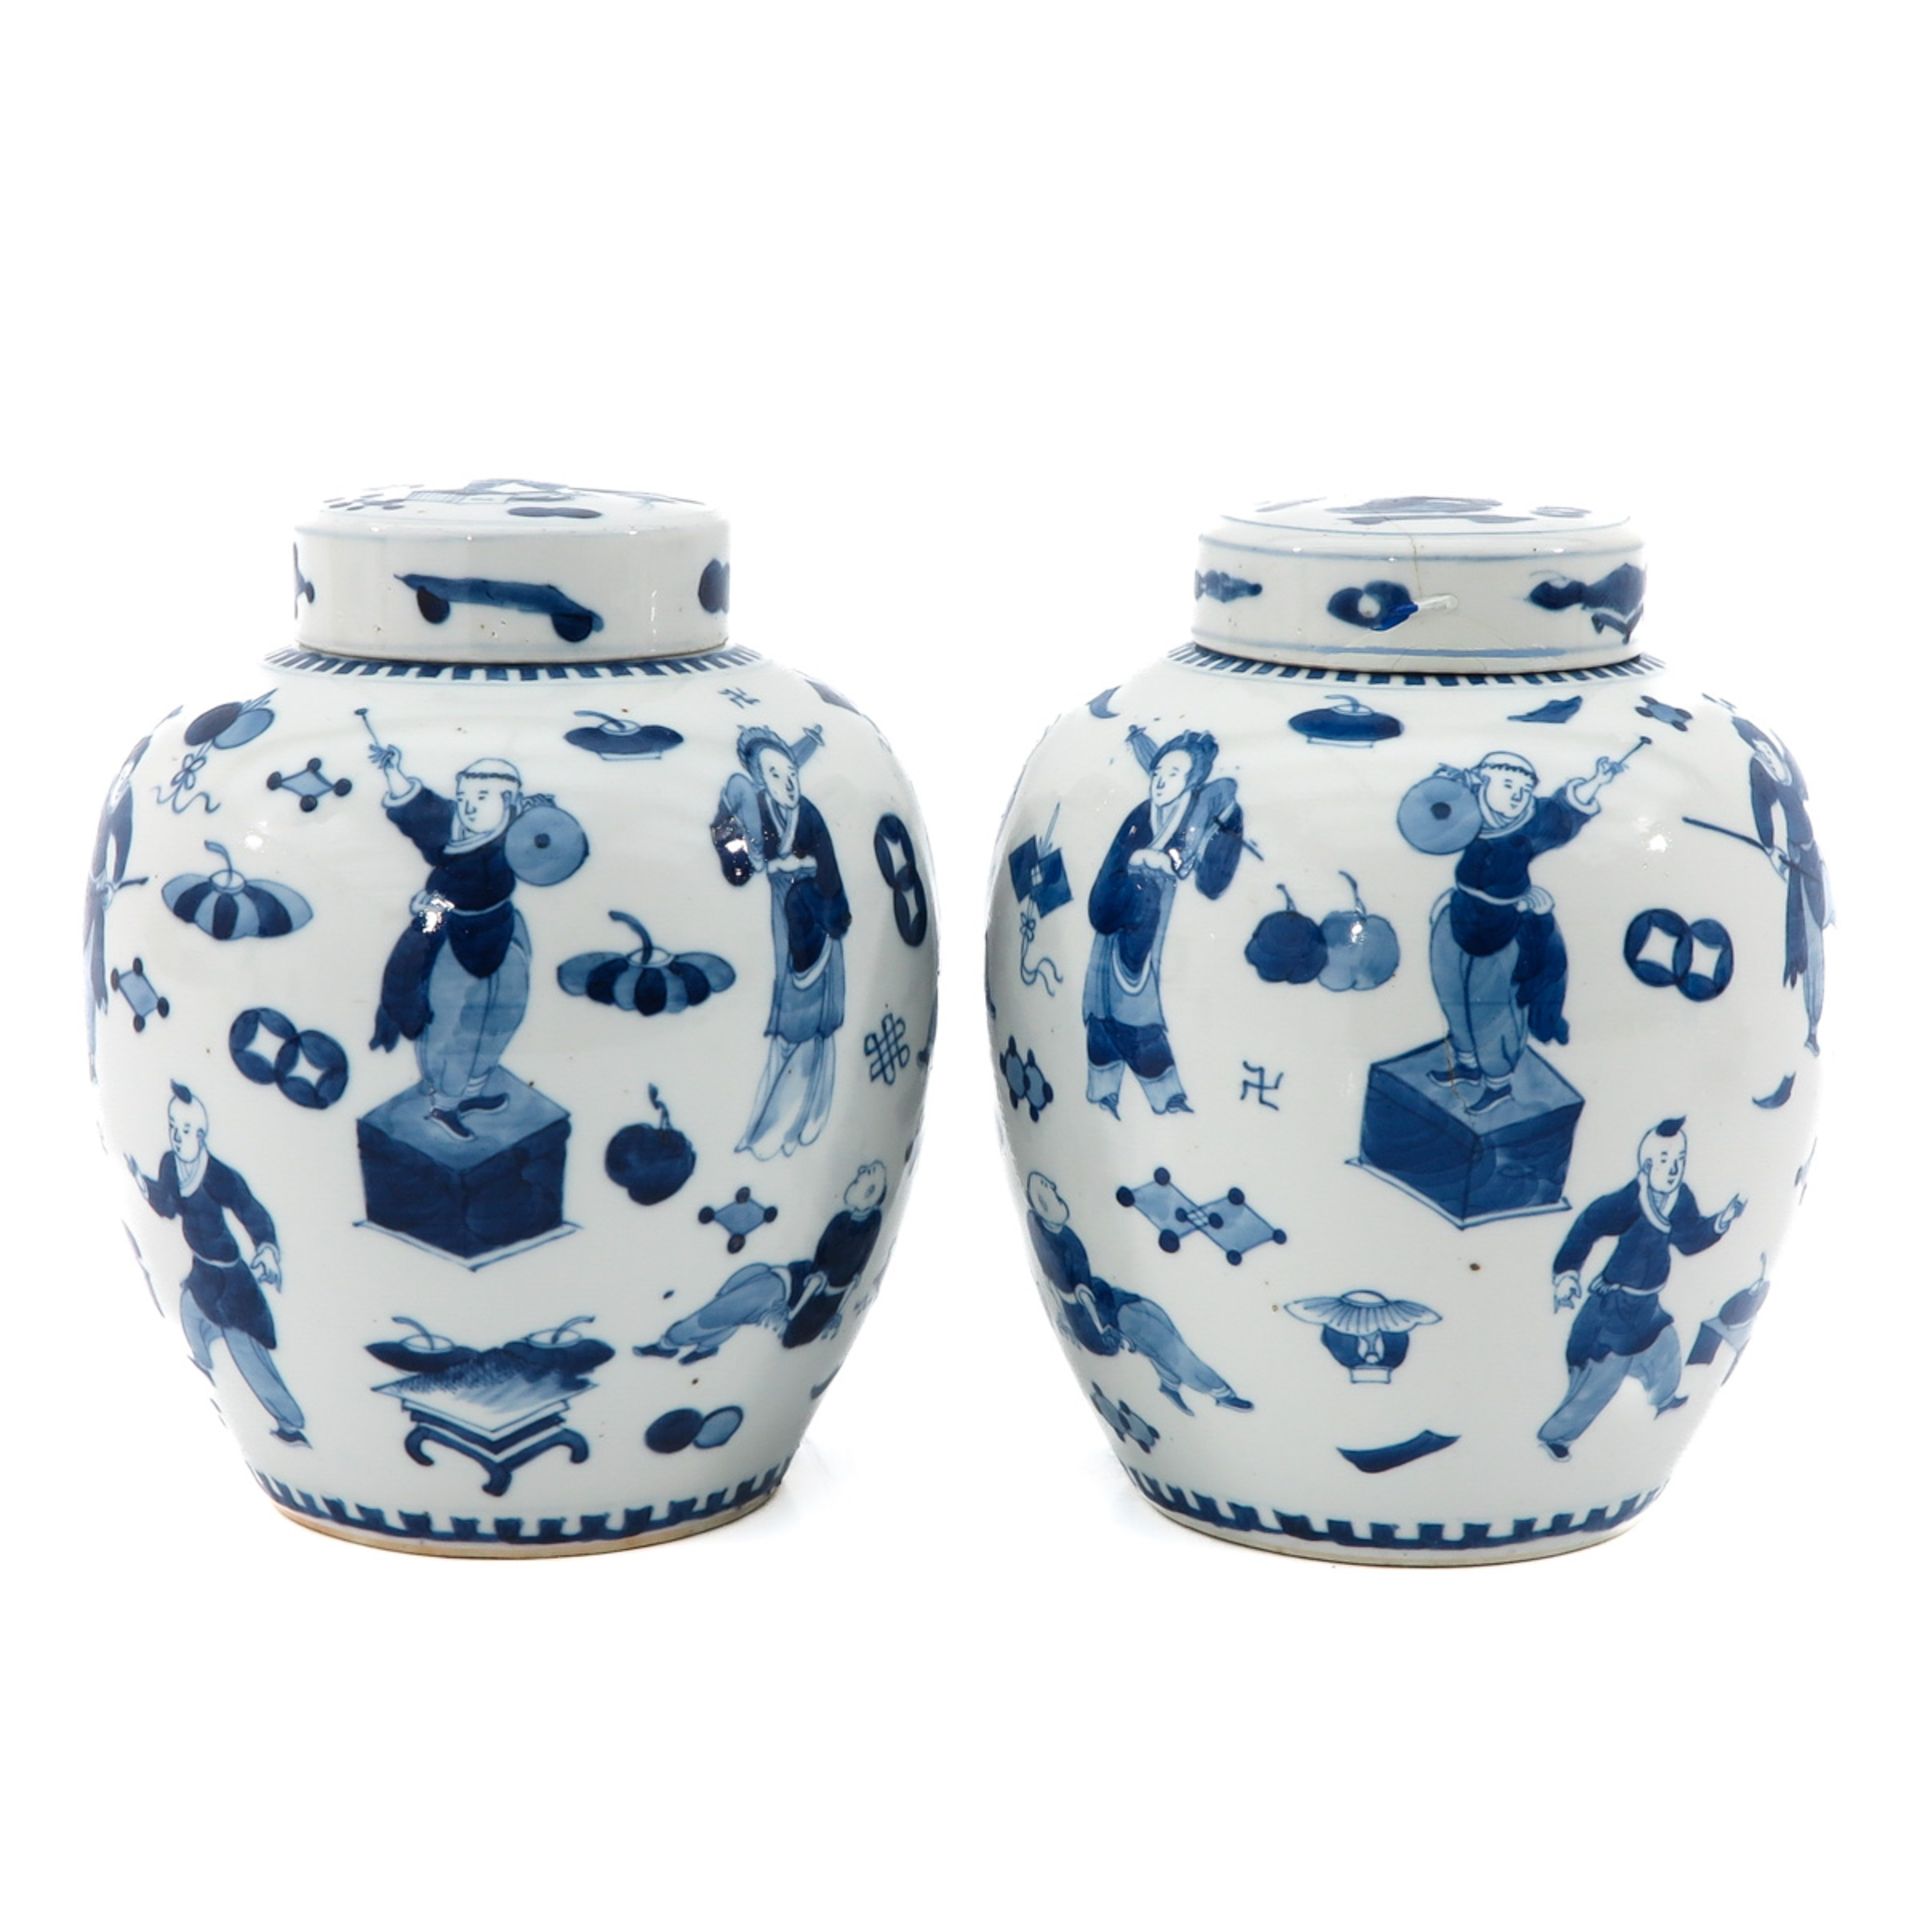 A Pair of Blue and White Ginger Jars